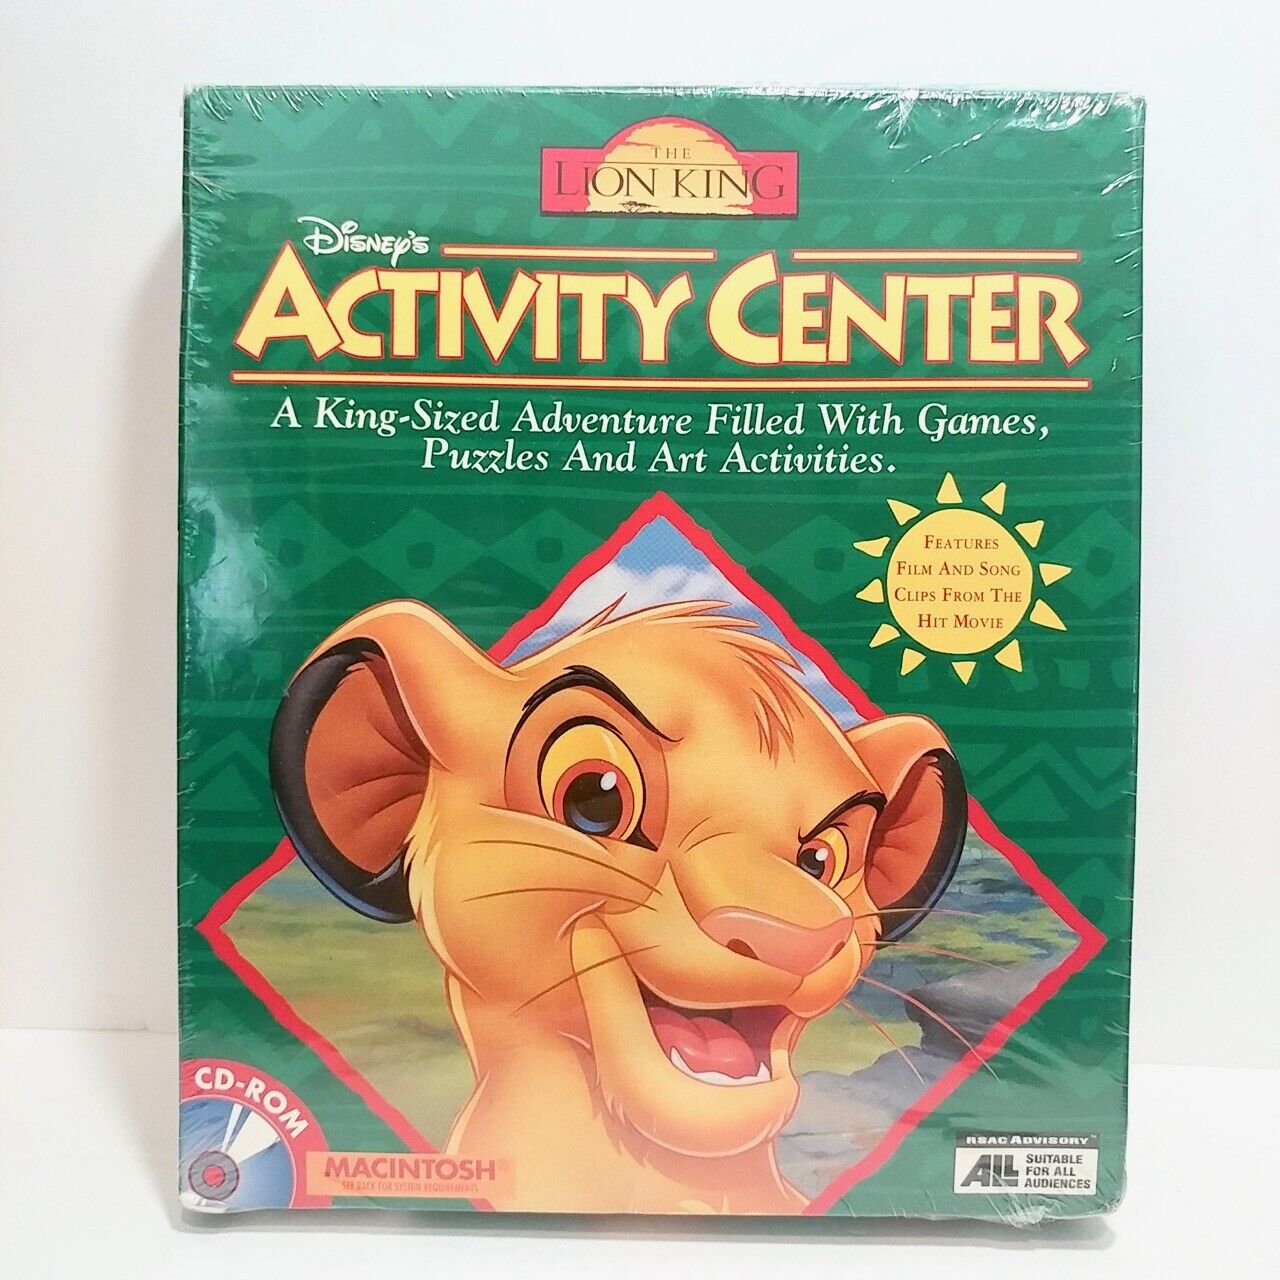 Vintage Walt Max 54% Special price for a limited time OFF Disney THE LION KING: CD-ROM Center Movie Activity